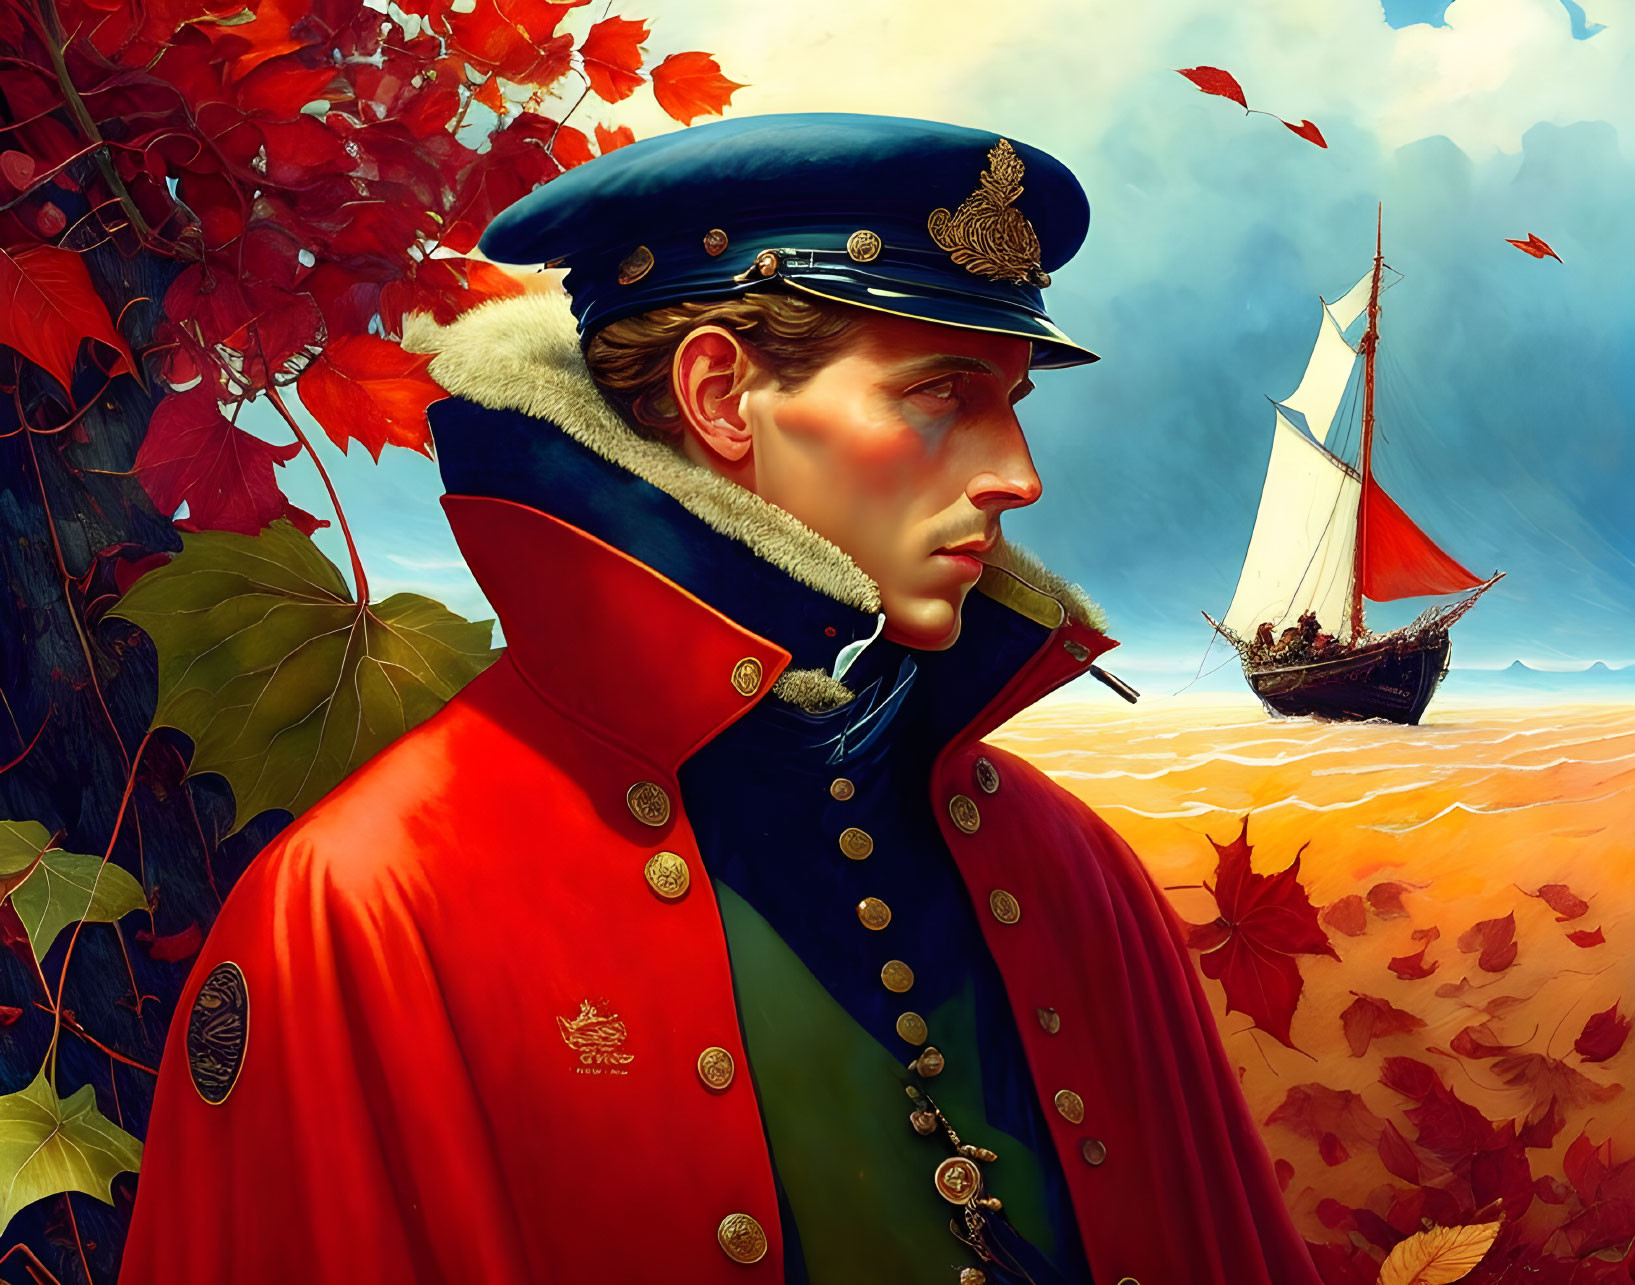 Young officer in red military jacket with fur collar, gazing at ship and autumn leaves.